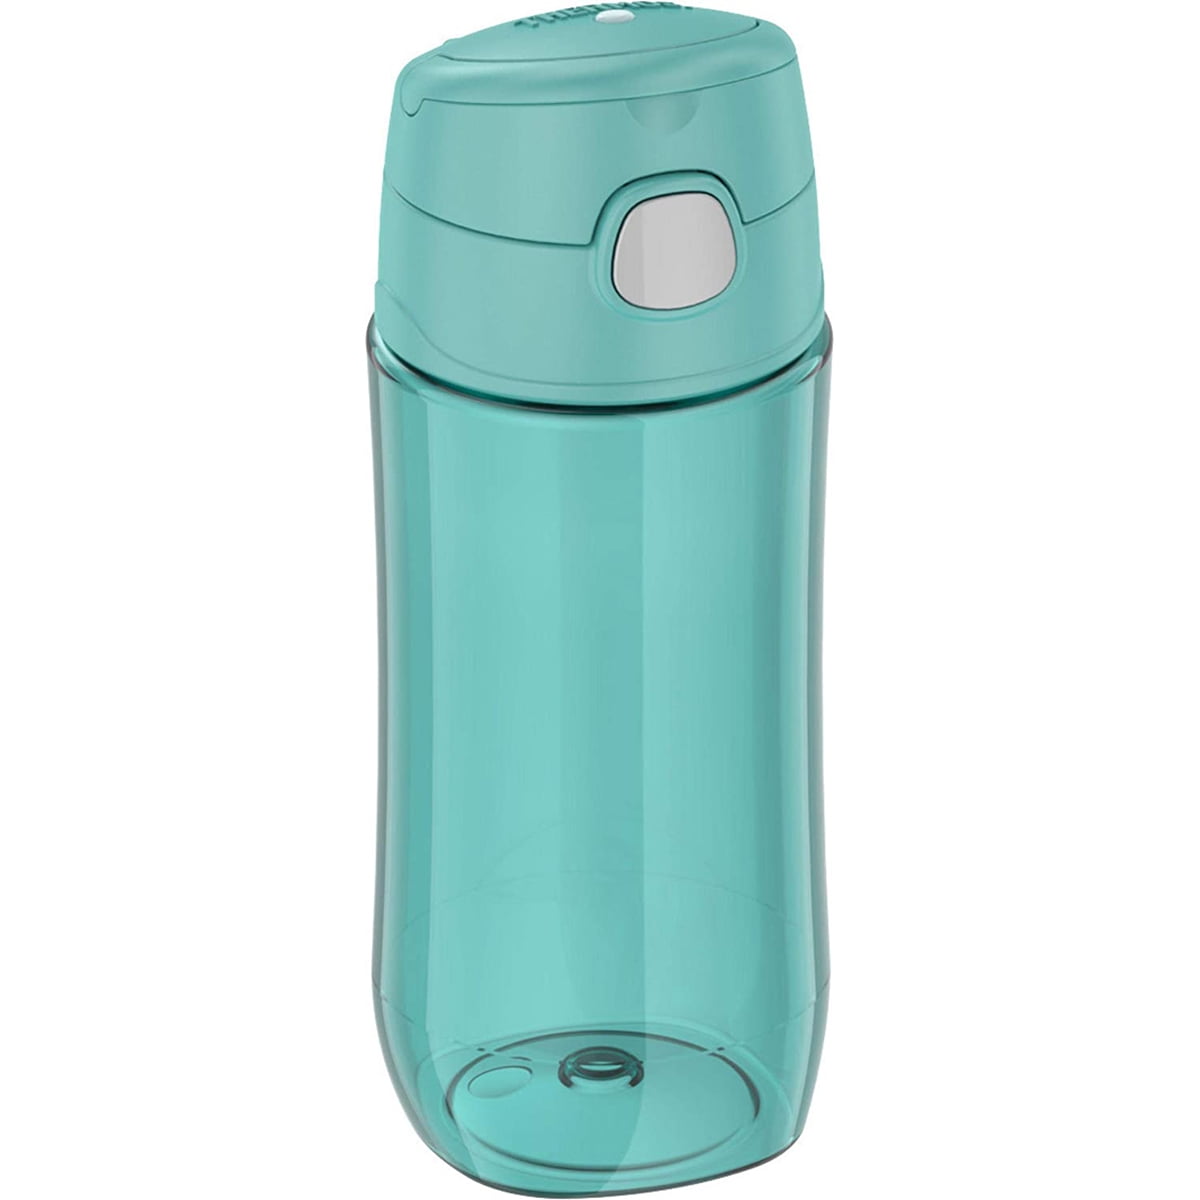  JARLSON® kids water bottle - MALI - insulated stainless steel water  bottle with chug lid - thermos - girls/boys (Dinosaur 'Star', 12 oz) : Baby